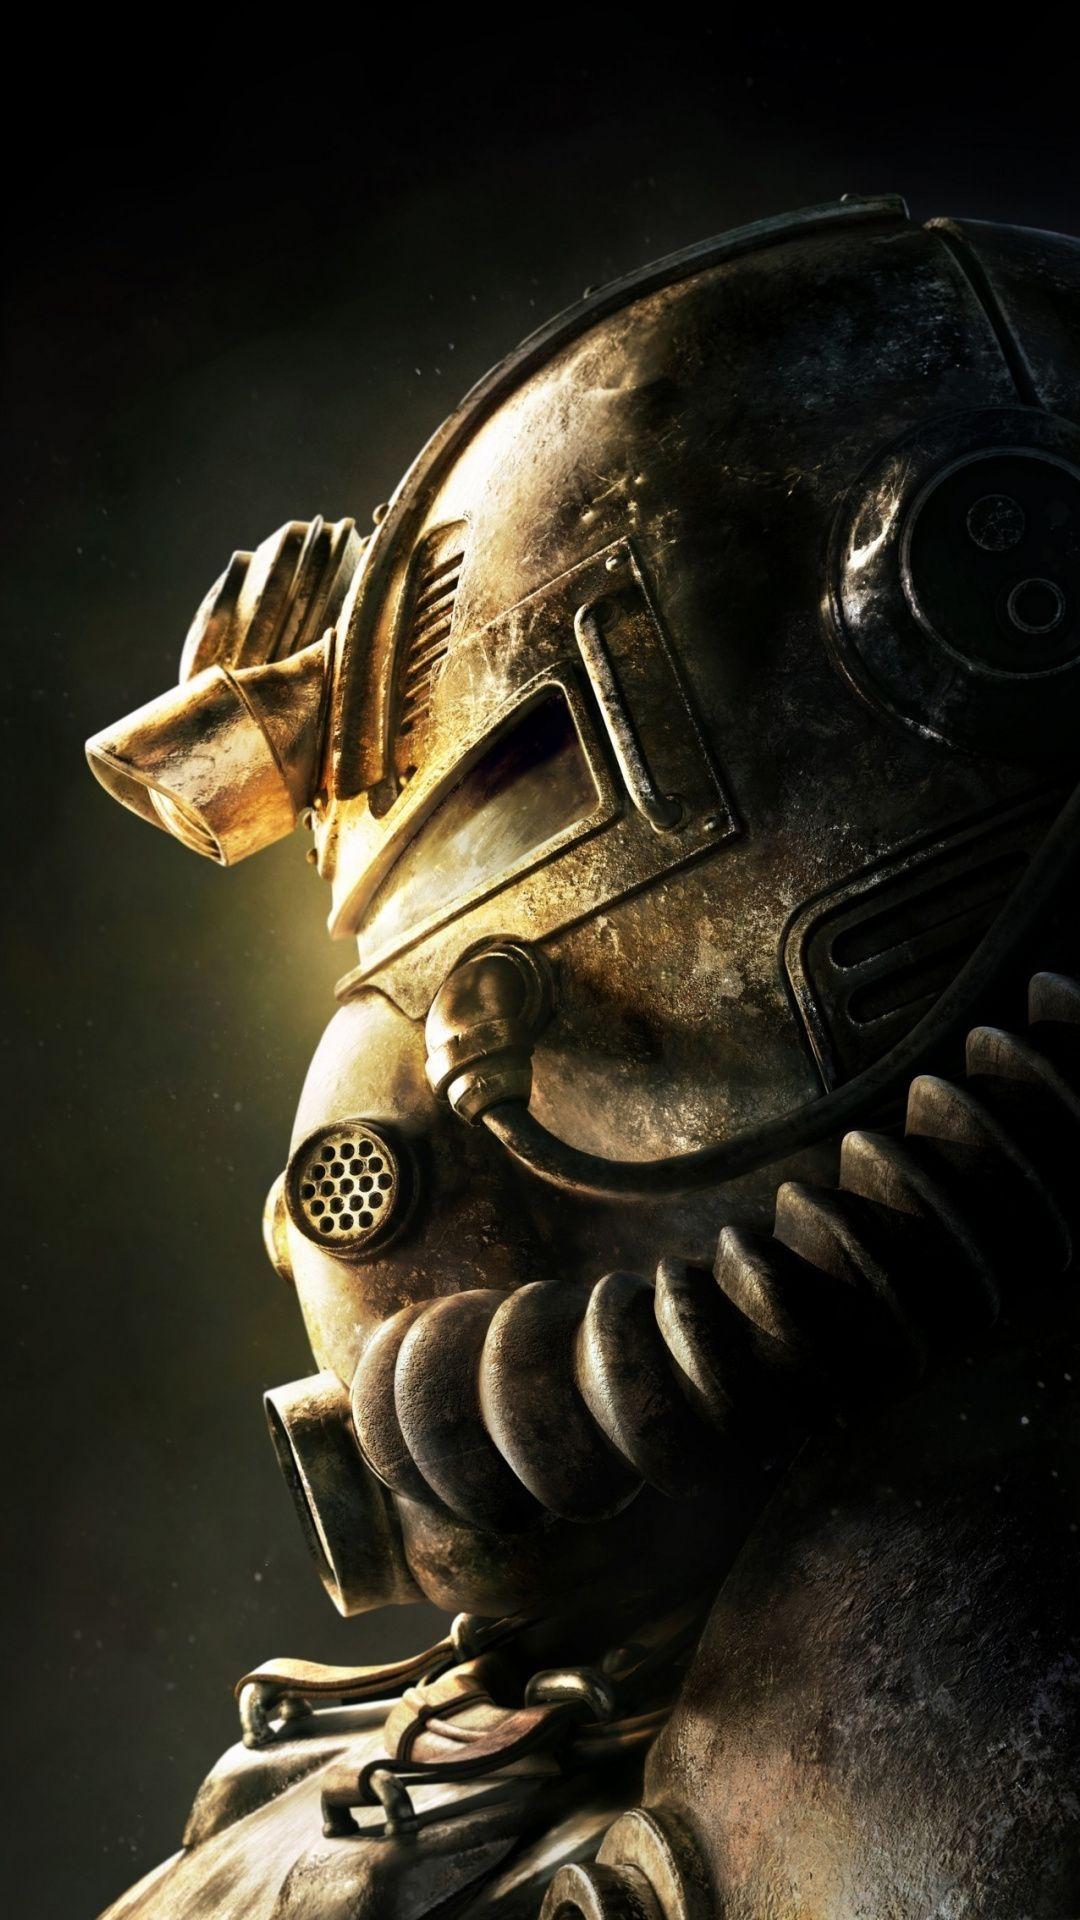 Fallout 76 Wallpapers Top Free Fallout 76 Backgrounds Wallpaperaccess